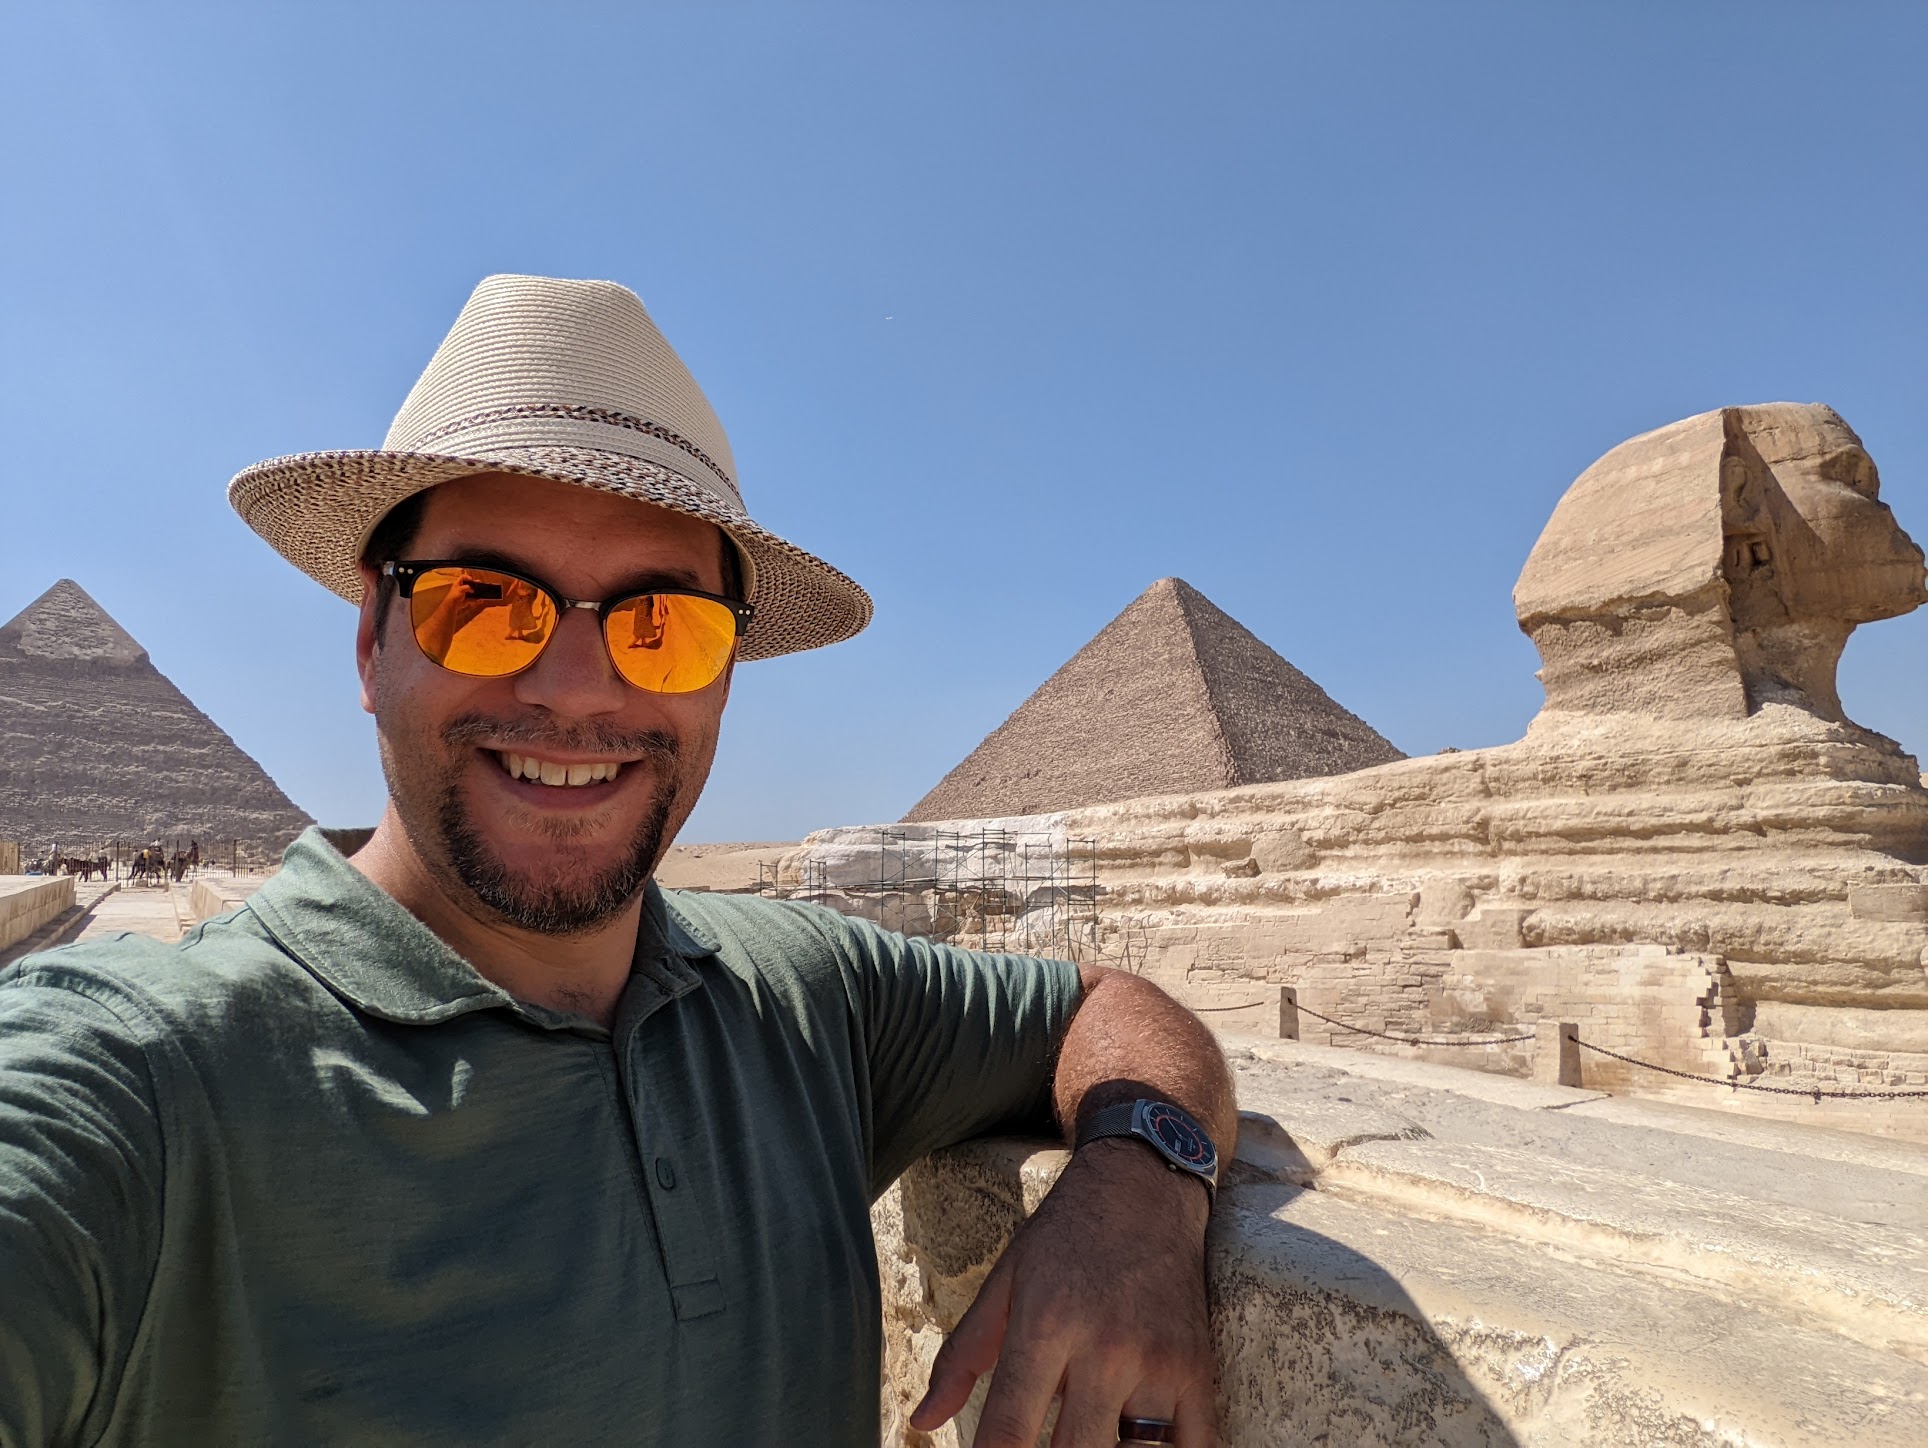 a man in a hat and sunglasses leaning on a stone ledge in front of pyramids